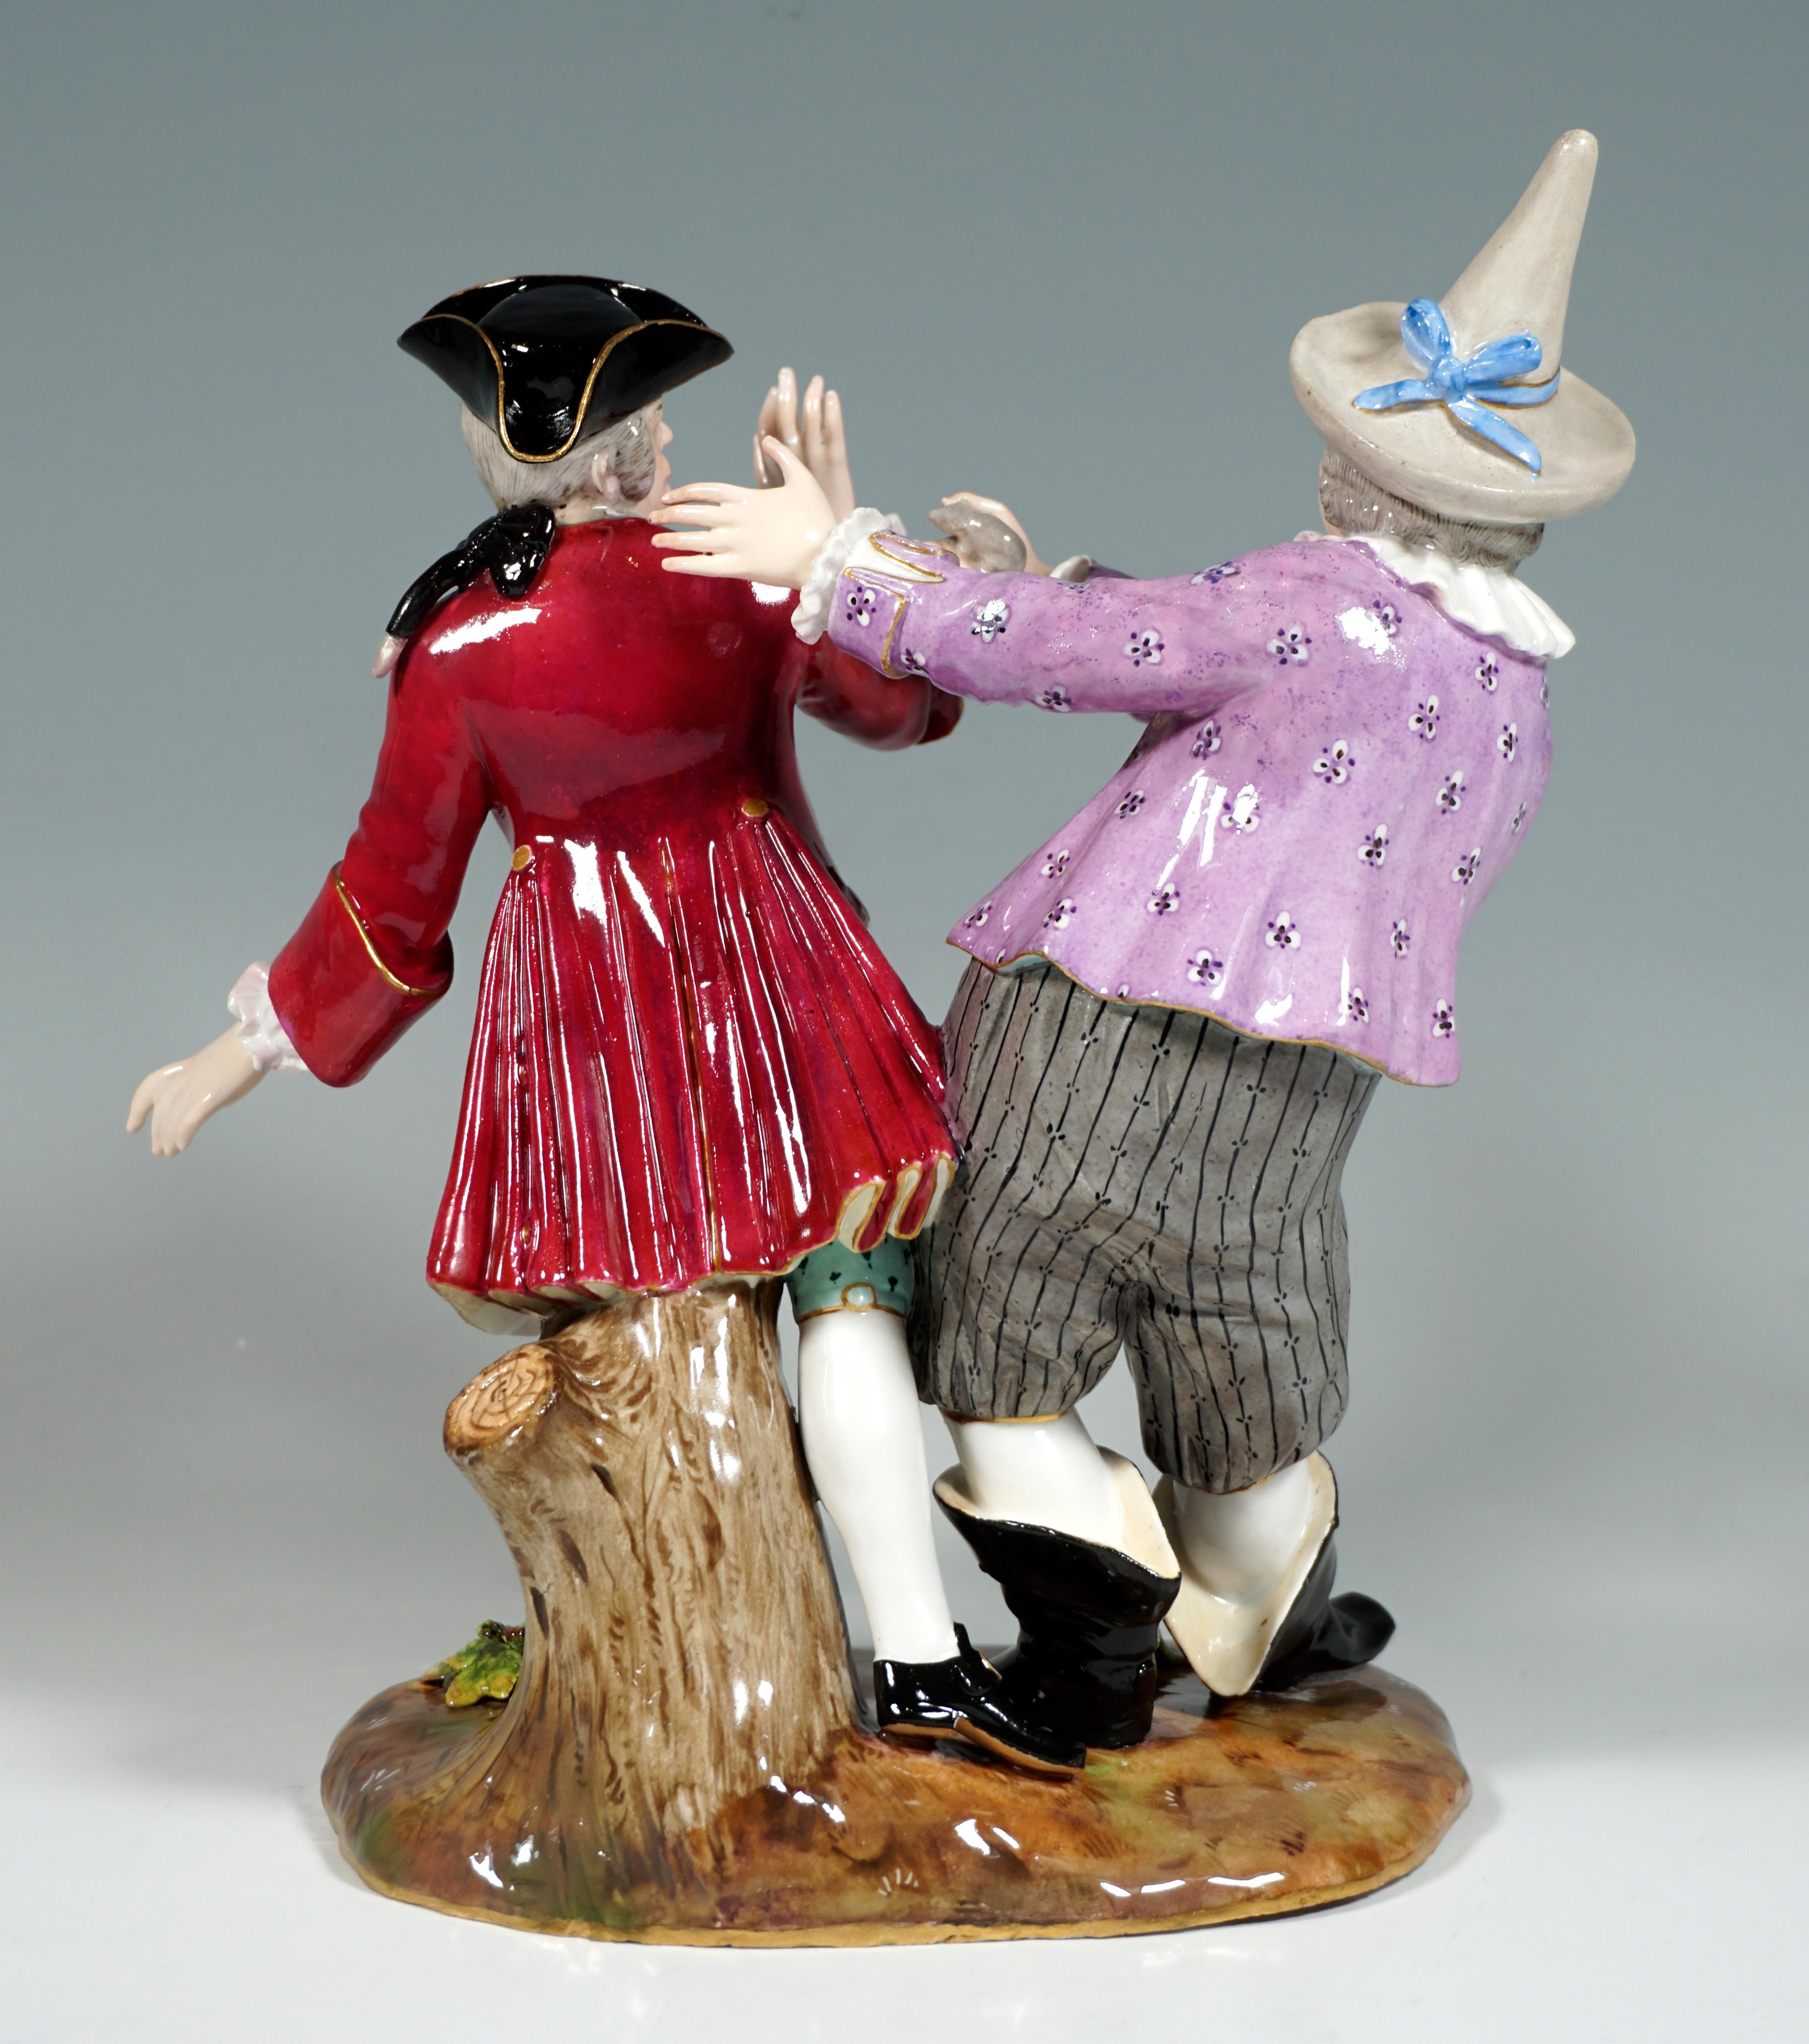 Hand-Crafted Meissen Group, Court Jesters Froehlich & Schmiedel, by Kaendler, Germany ca 1850